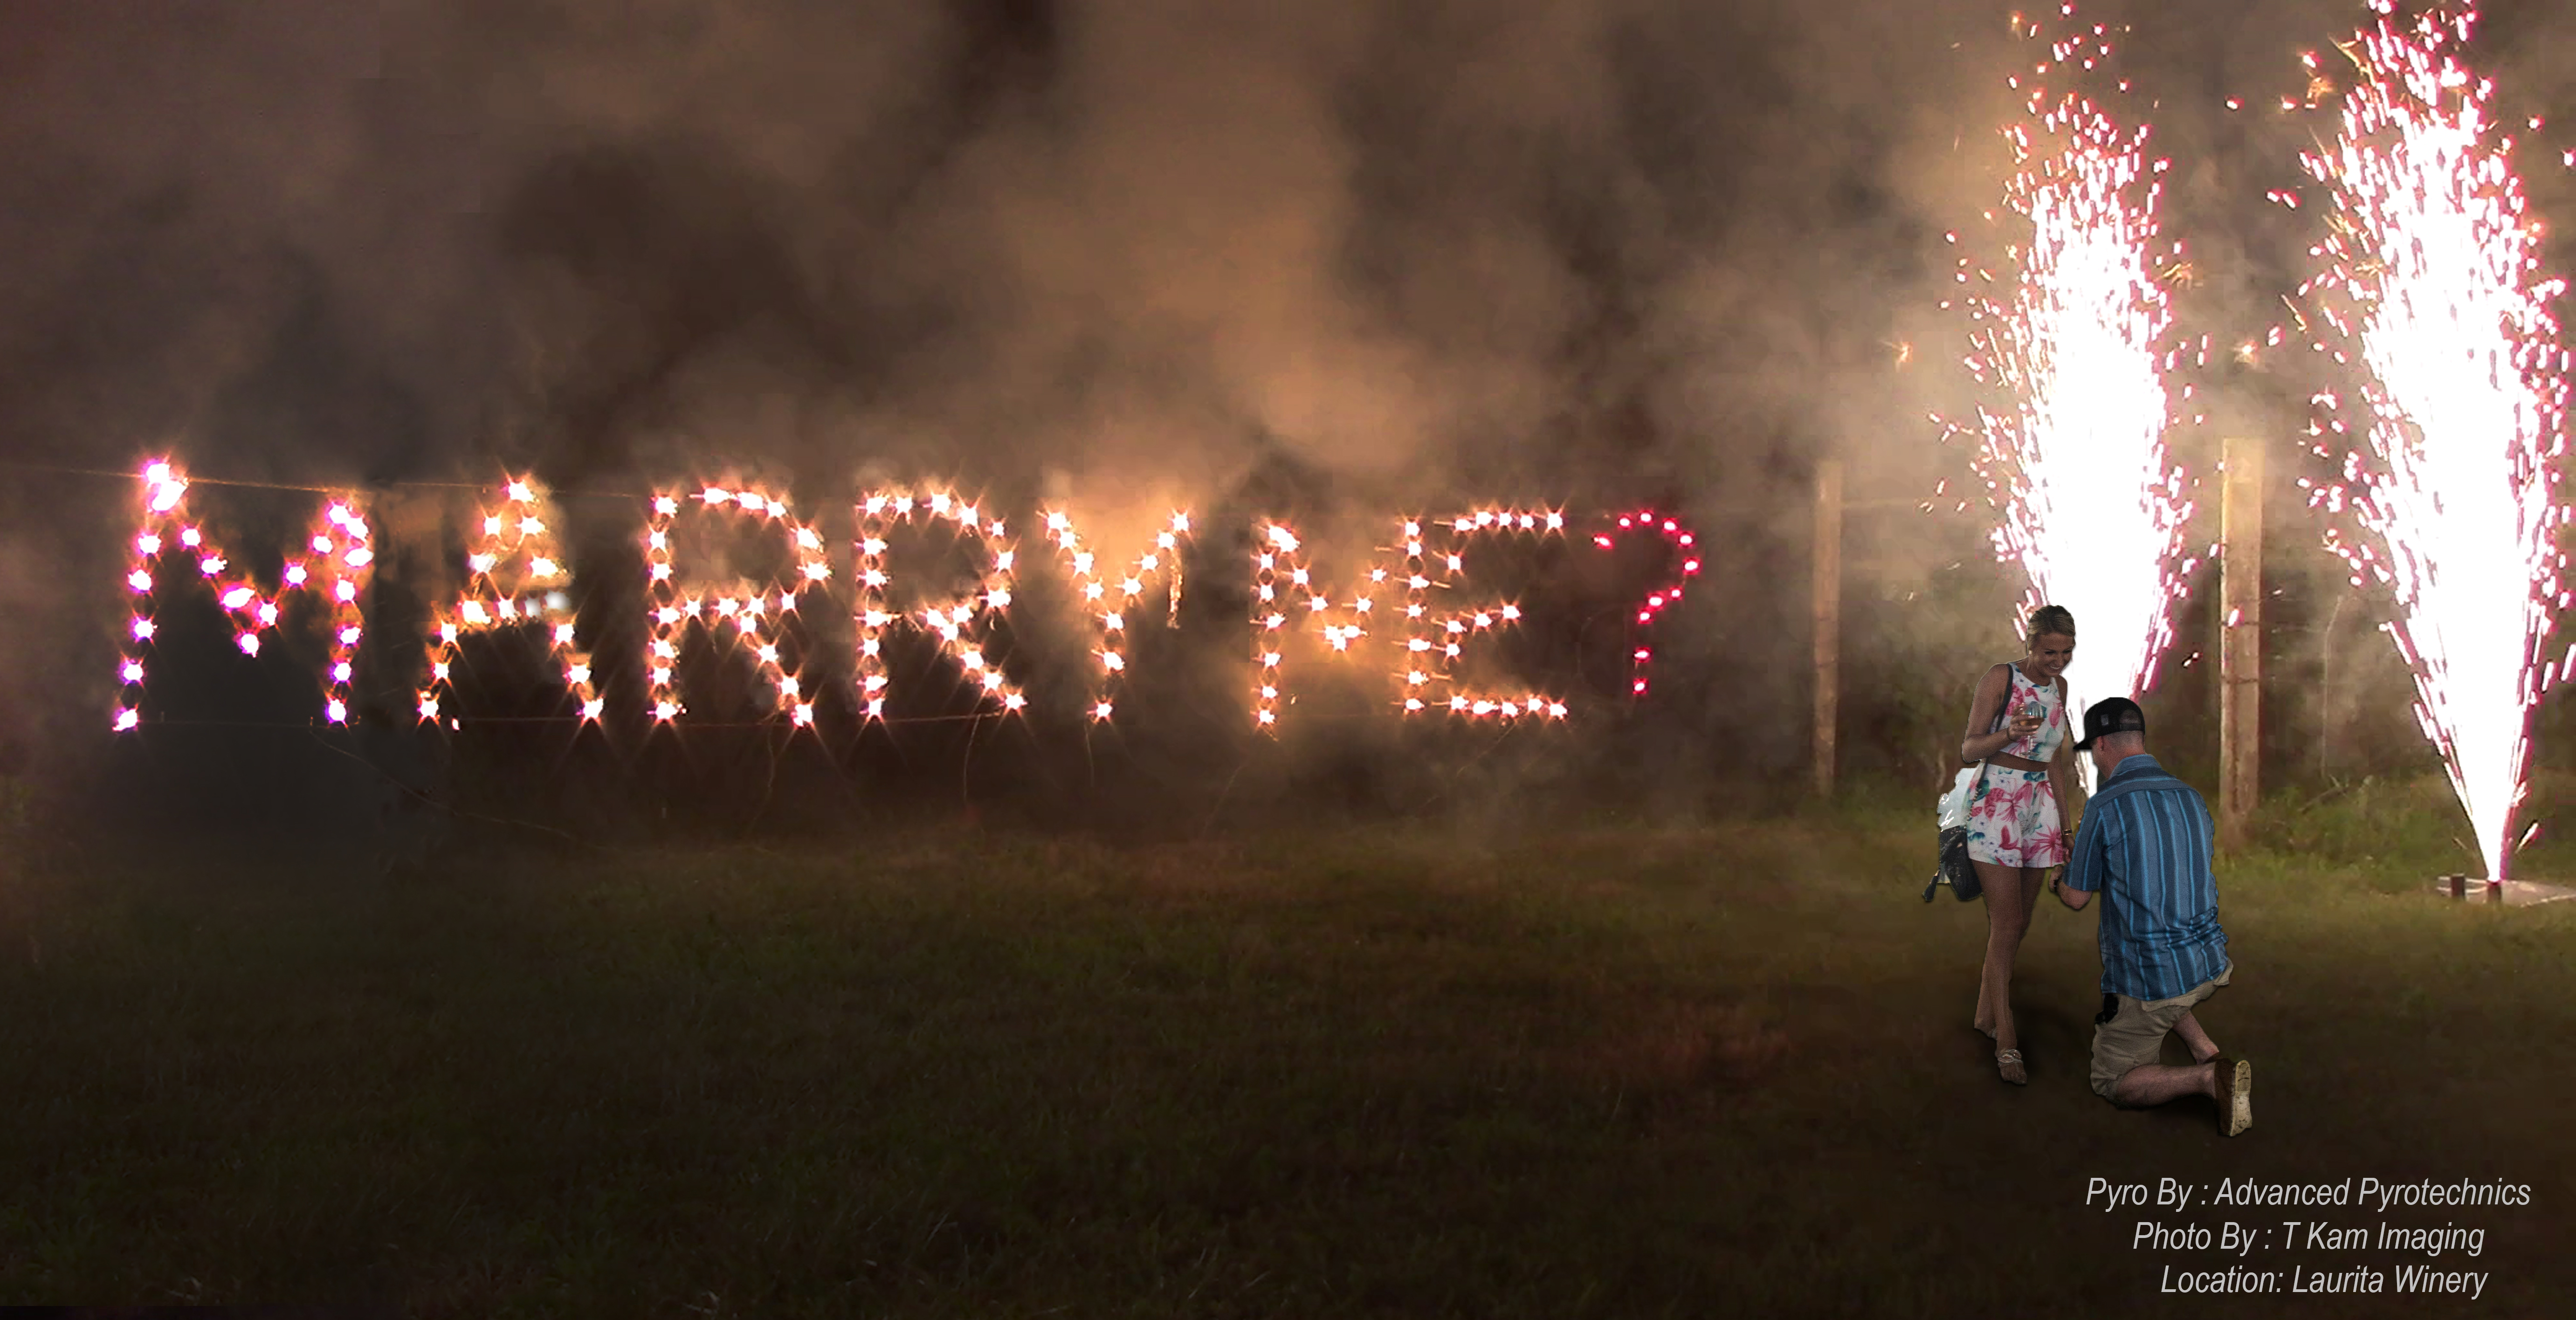 A wedding proposal featuring the couple and a fire writing set piece that says Marry Me? that was designed by Advanced Pyrotechnics, a fireworks company.